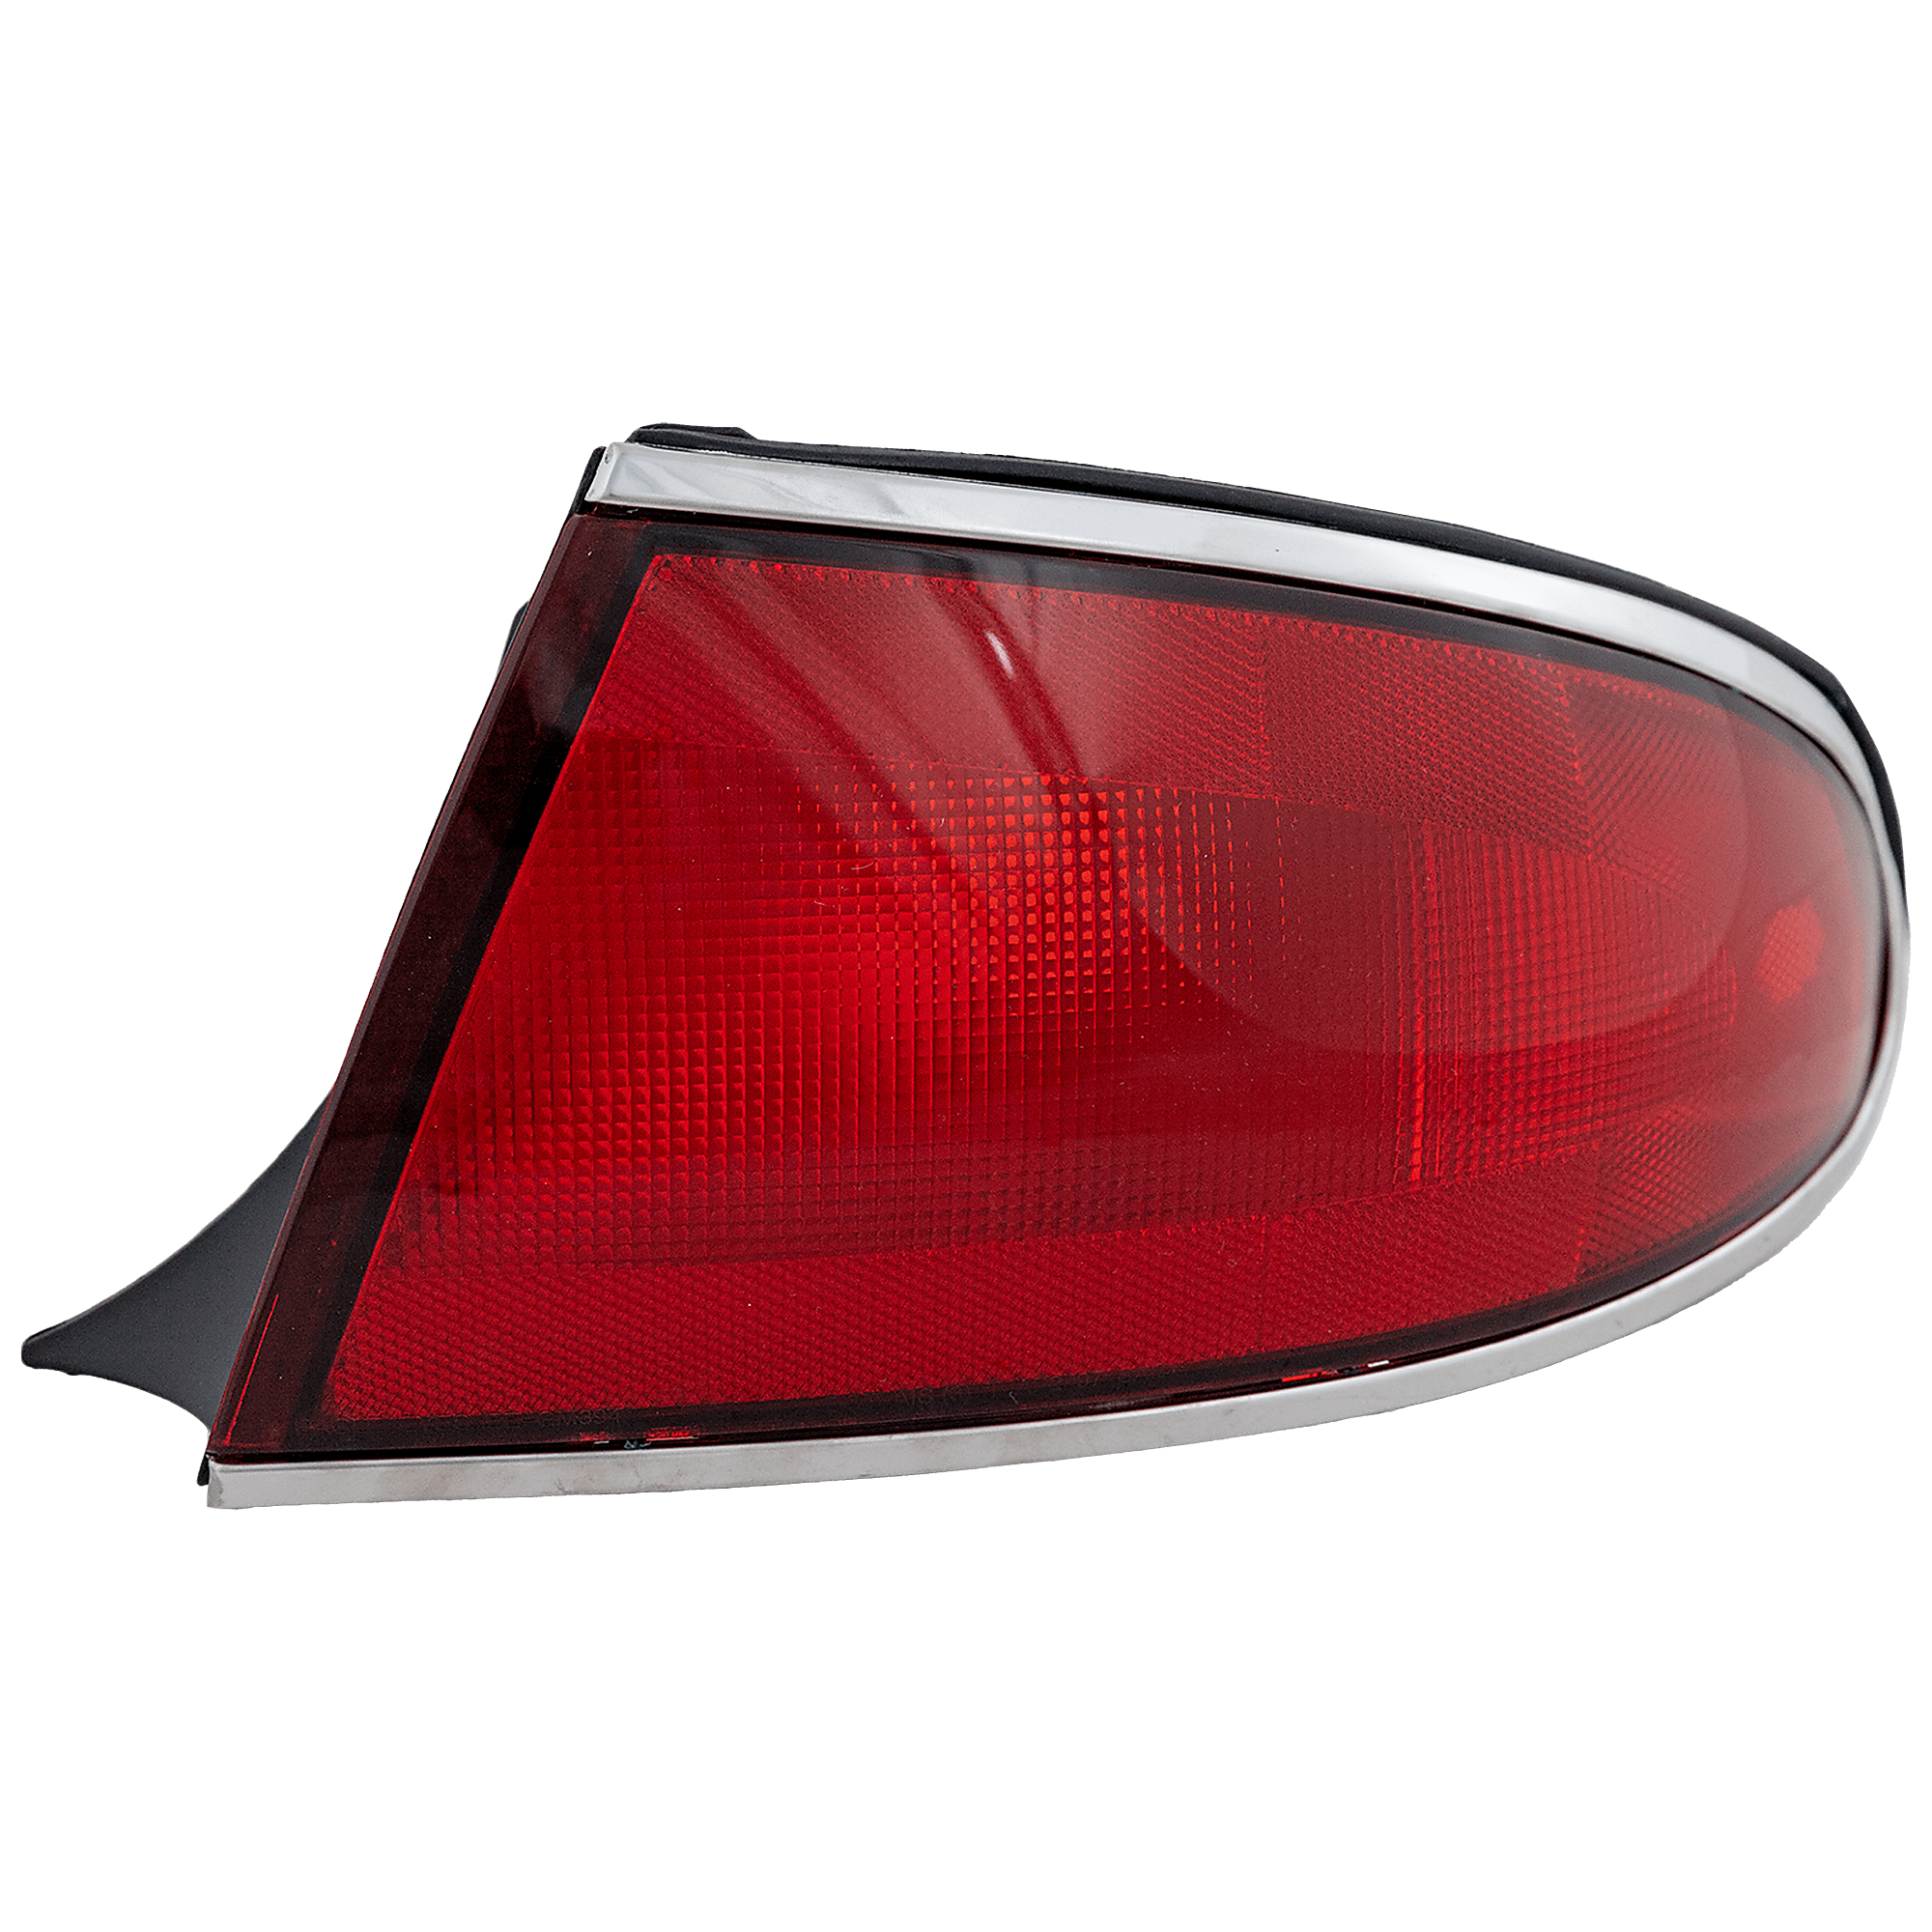 2003 Buick Century Tail Light Bulb Replacement